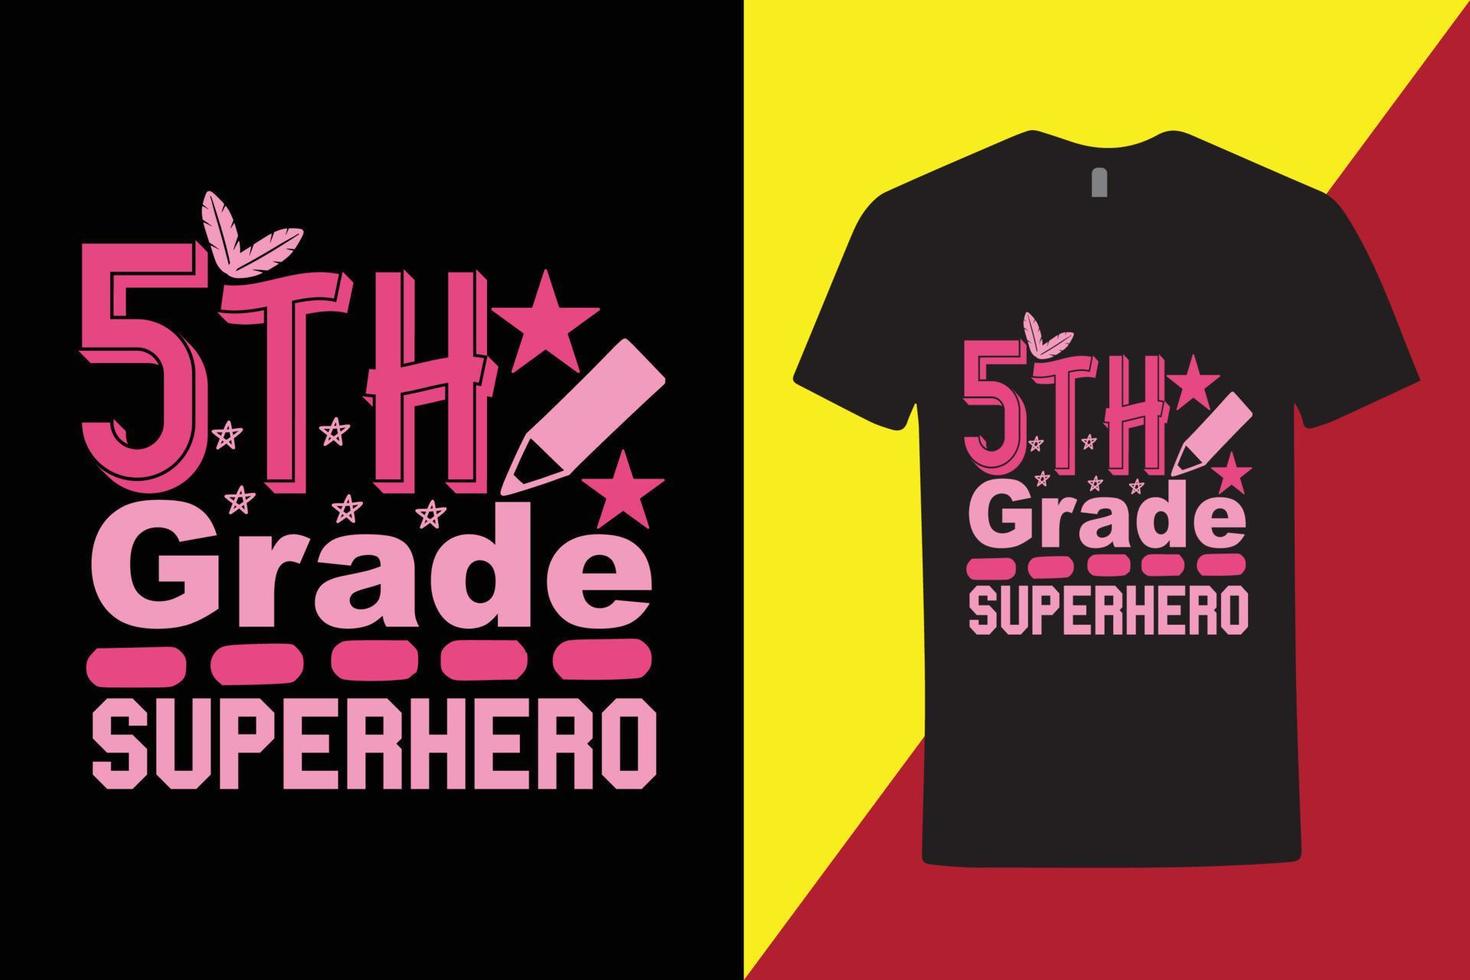 Amazing typography t-shirt for fifth grade and fourth grade student. cool t shirt for high school,college,varsity student . typography t shirt design . vector